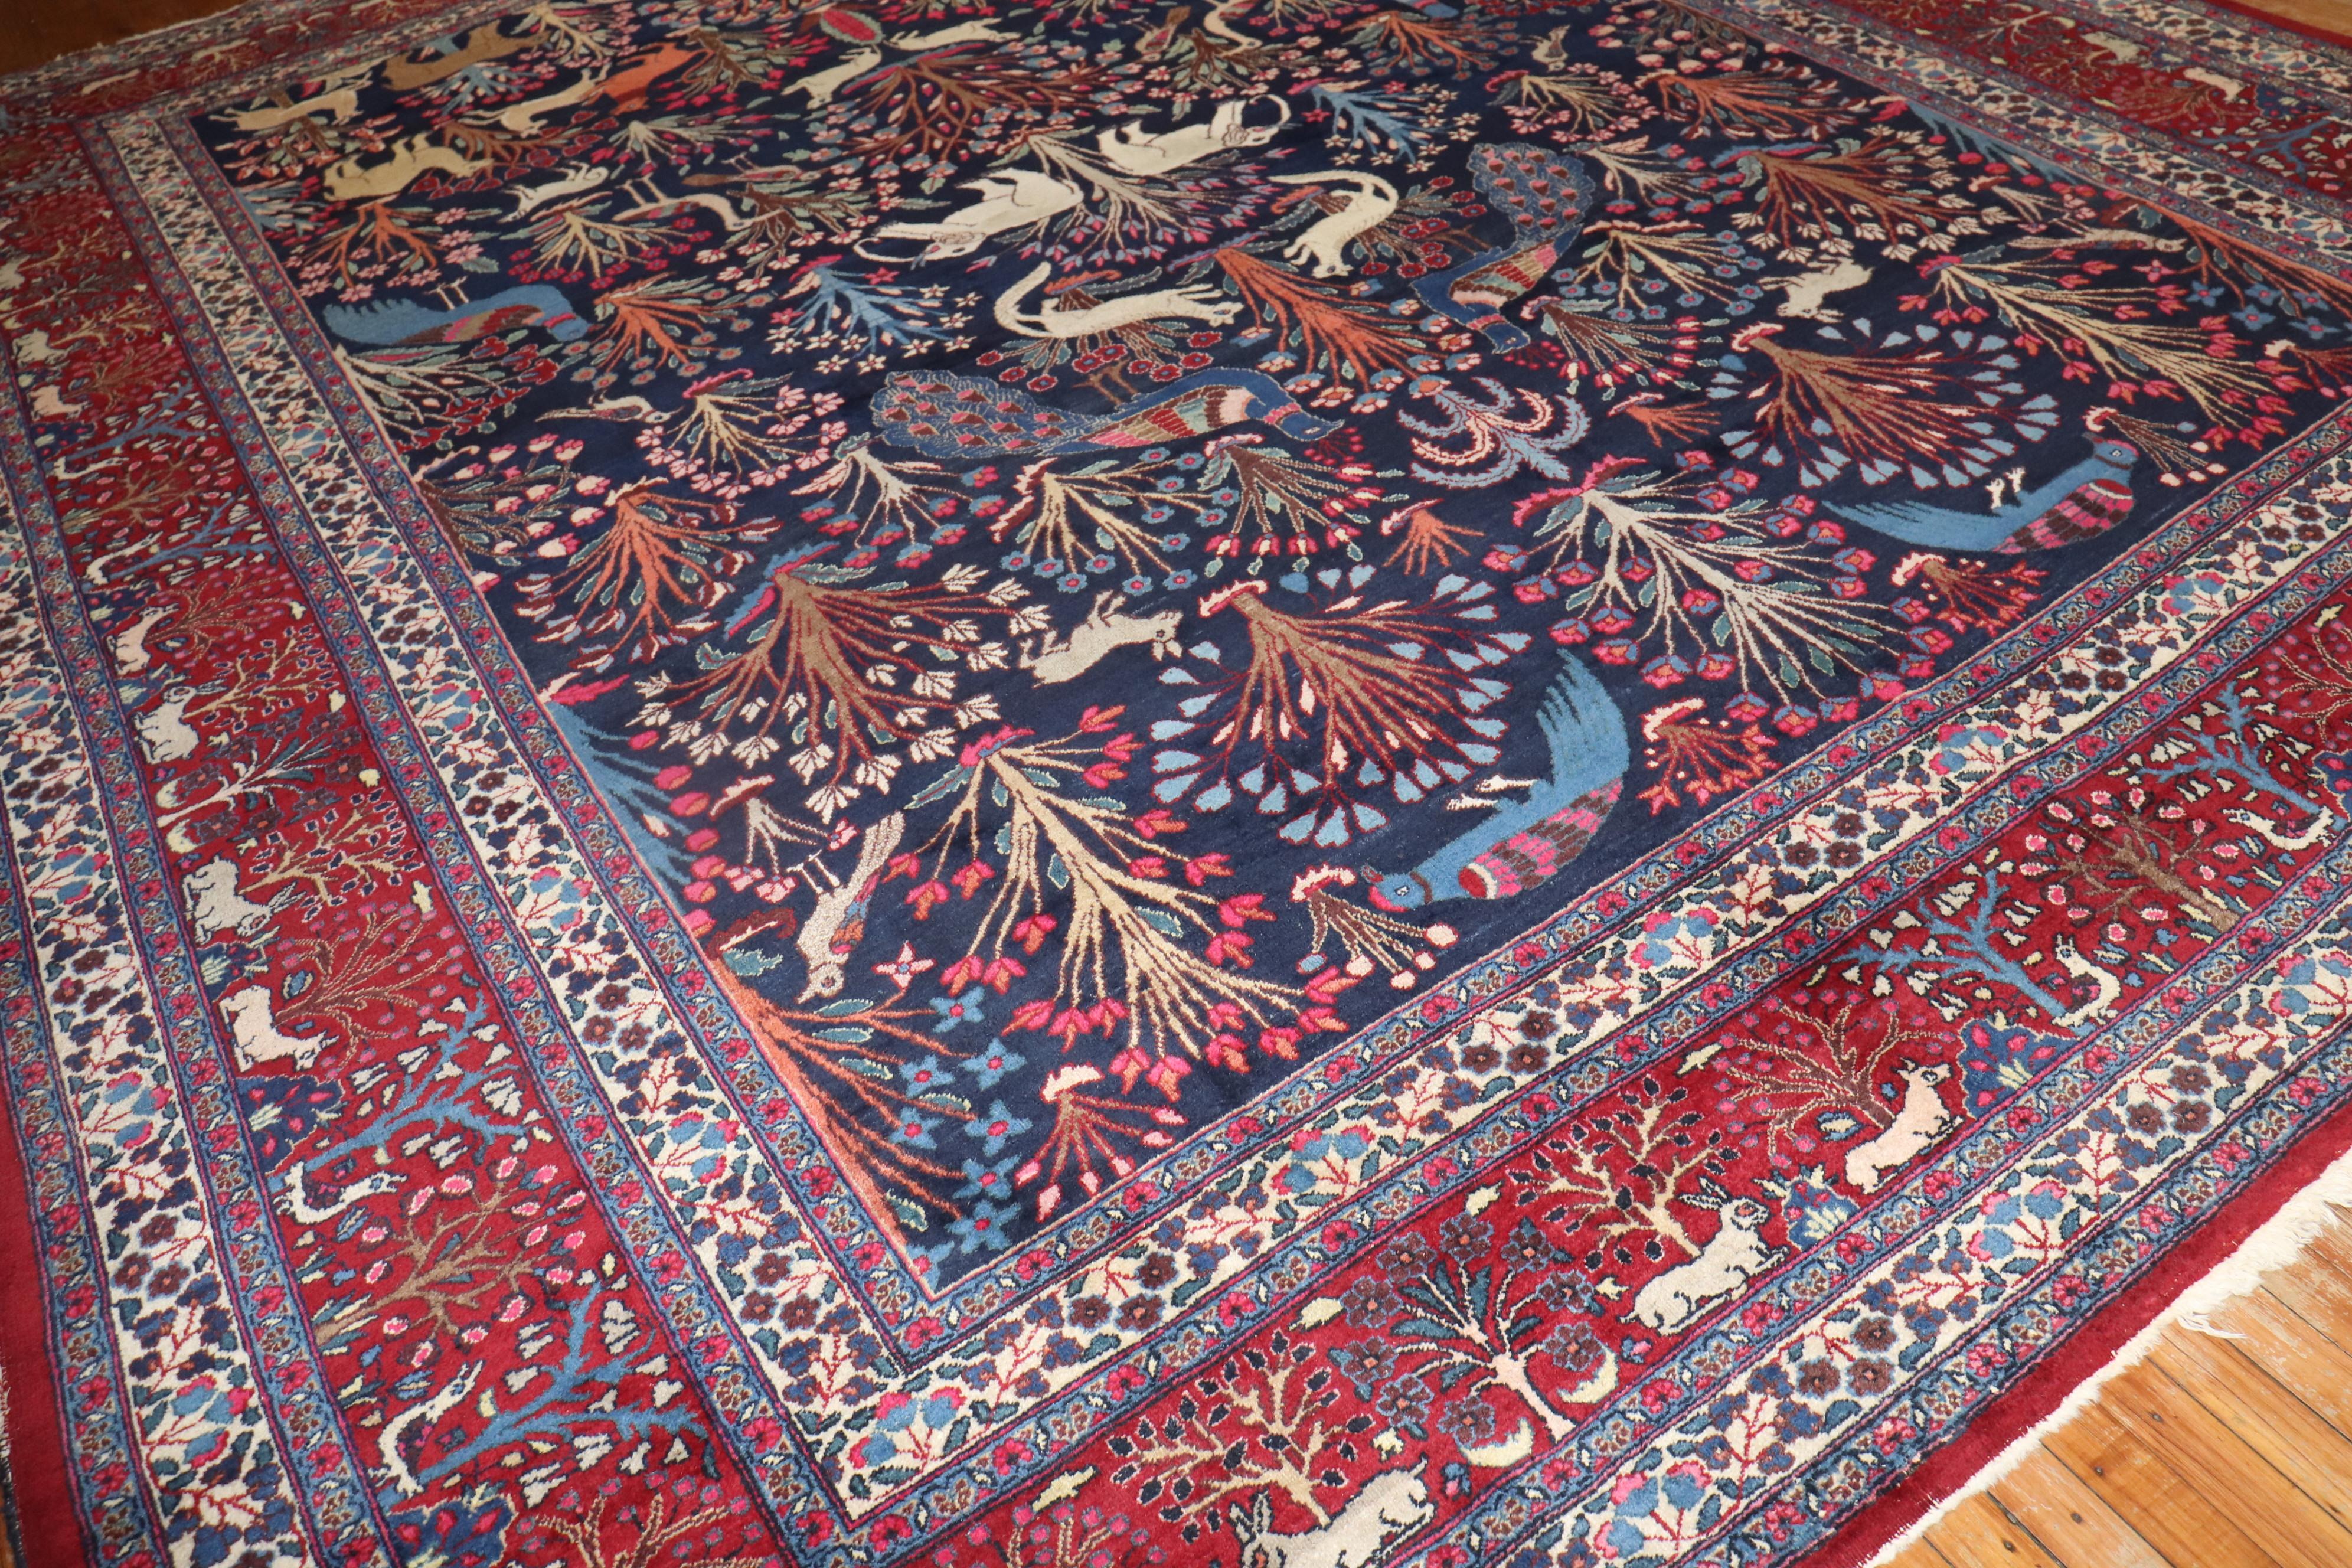 An early 20th Century Persian Animal Pictorial Large Room Size rug

rug no. j3141
size 11' 7